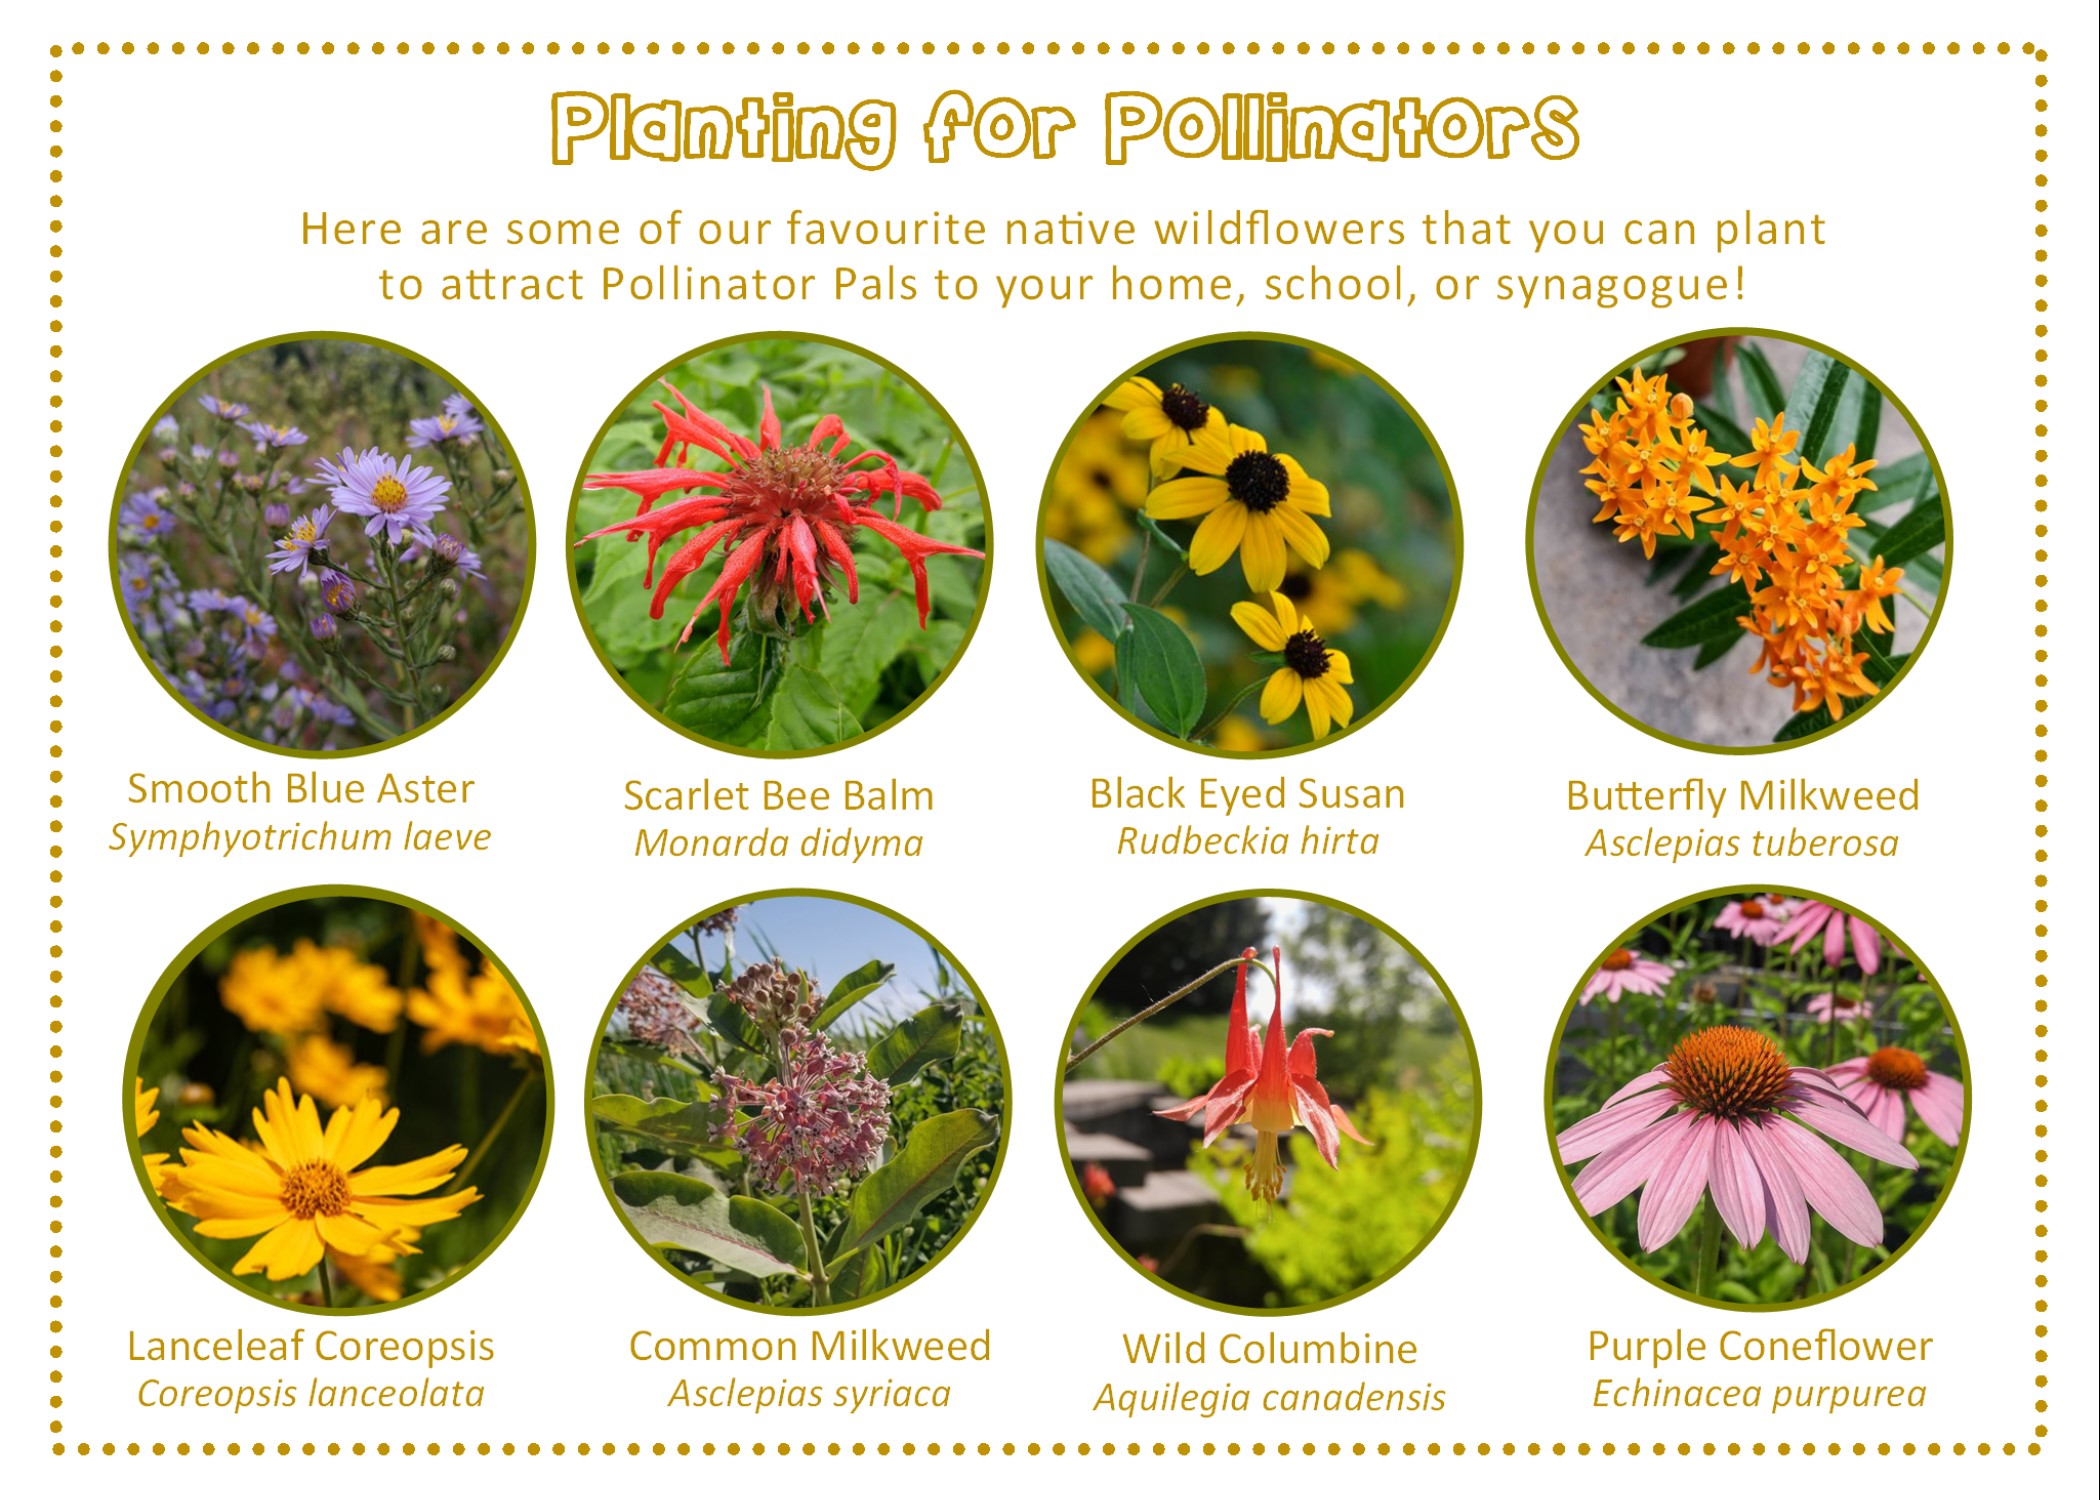 Planting for Pollinators Here are some of our favourite native wildflowers that you can plant to attract Pollinator Pals to your home, school, or synagogue! Smooth Blue Aster Symphyotrichum laeve Scarlet Bee Balm Monarda didyma Black Eyed Susan Rudbeckia hirta Butterfly Milkweed Asclepias tuberosa Lanceleaf Coreopsis Coreopsis lanceolata Common Milkweed Asclepias syriaca Wild Columbine Aquilegia canadensis Purple Coneflower Echinacea purpurea 